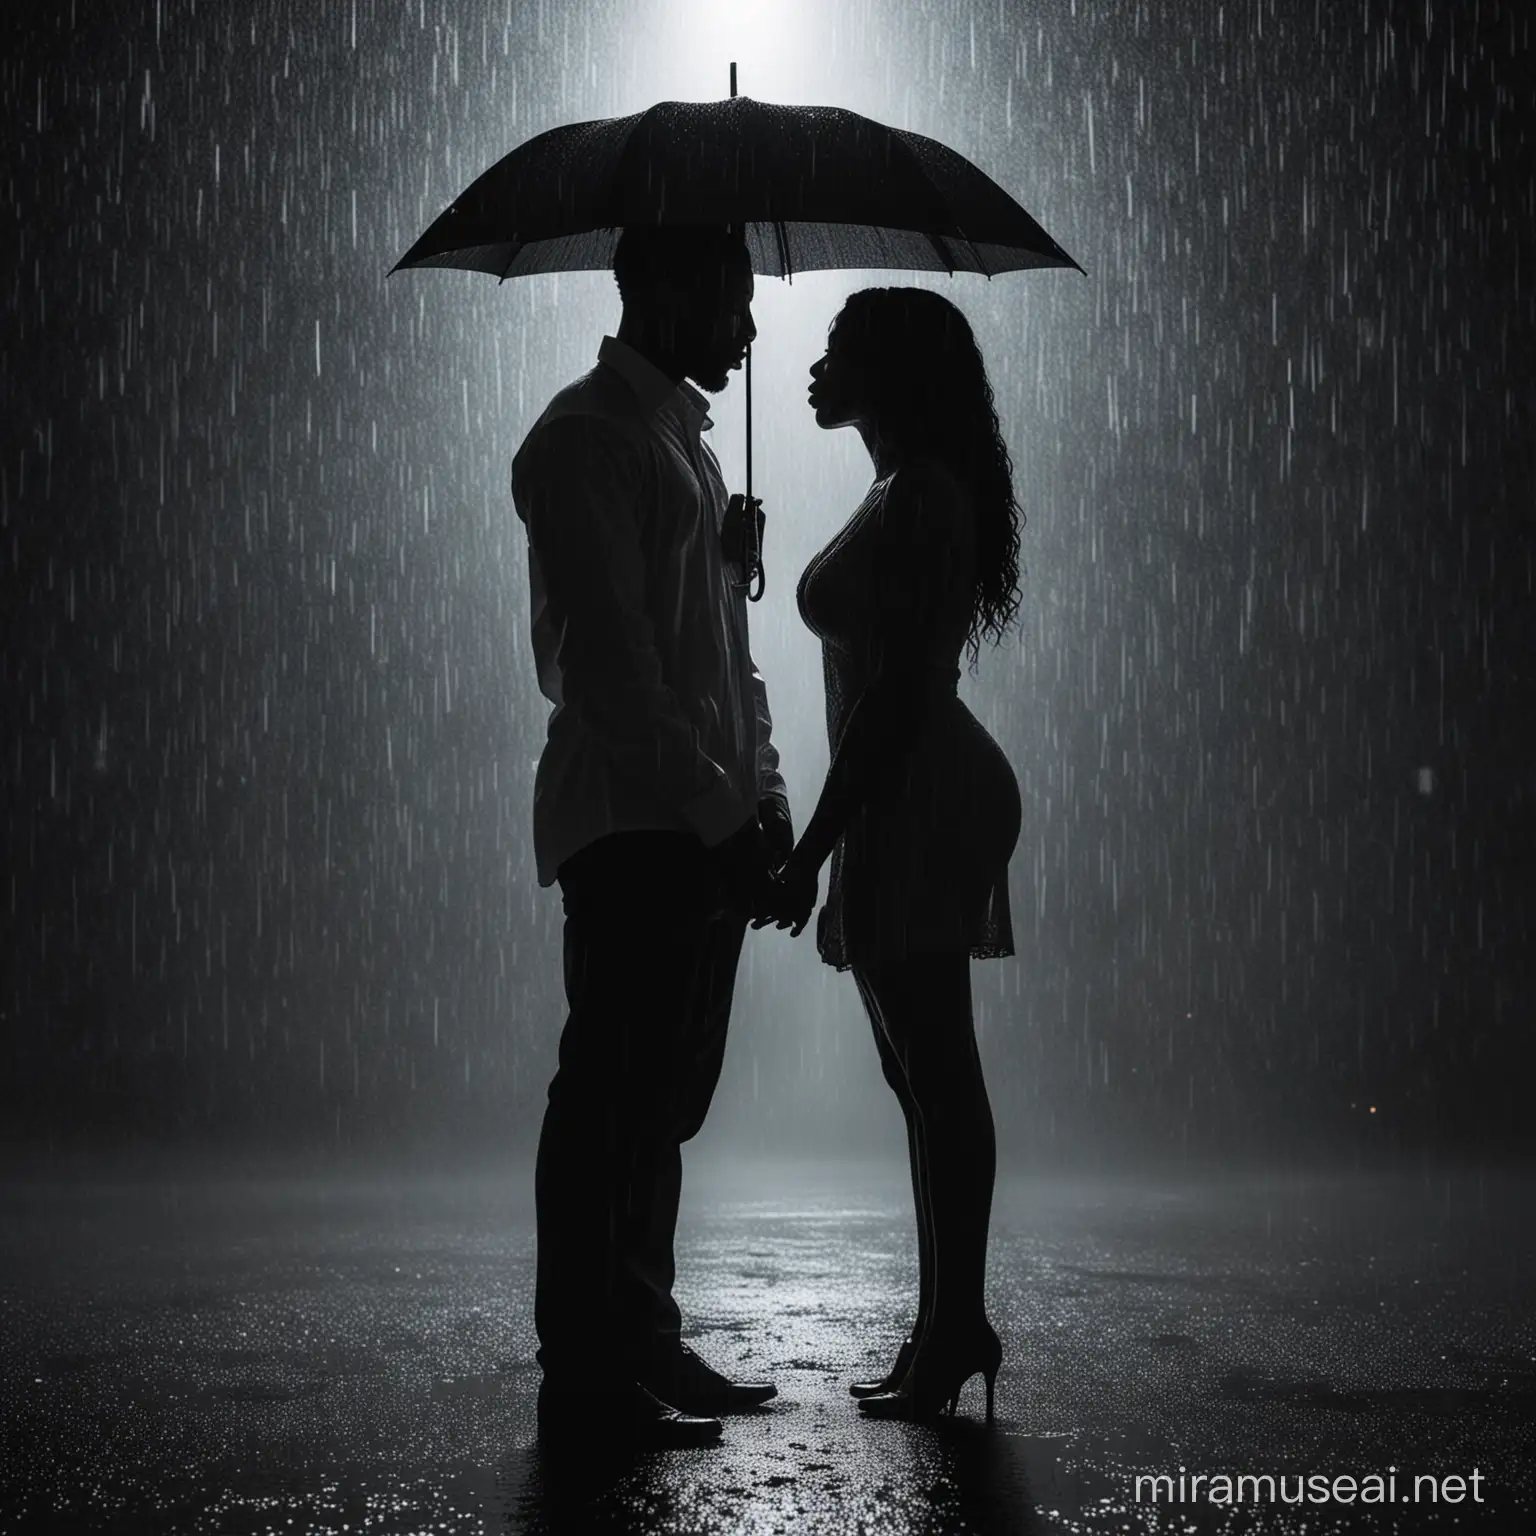 Rainy Night Romance Silhouettes of Melanin Woman and Man Embracing in the Dark